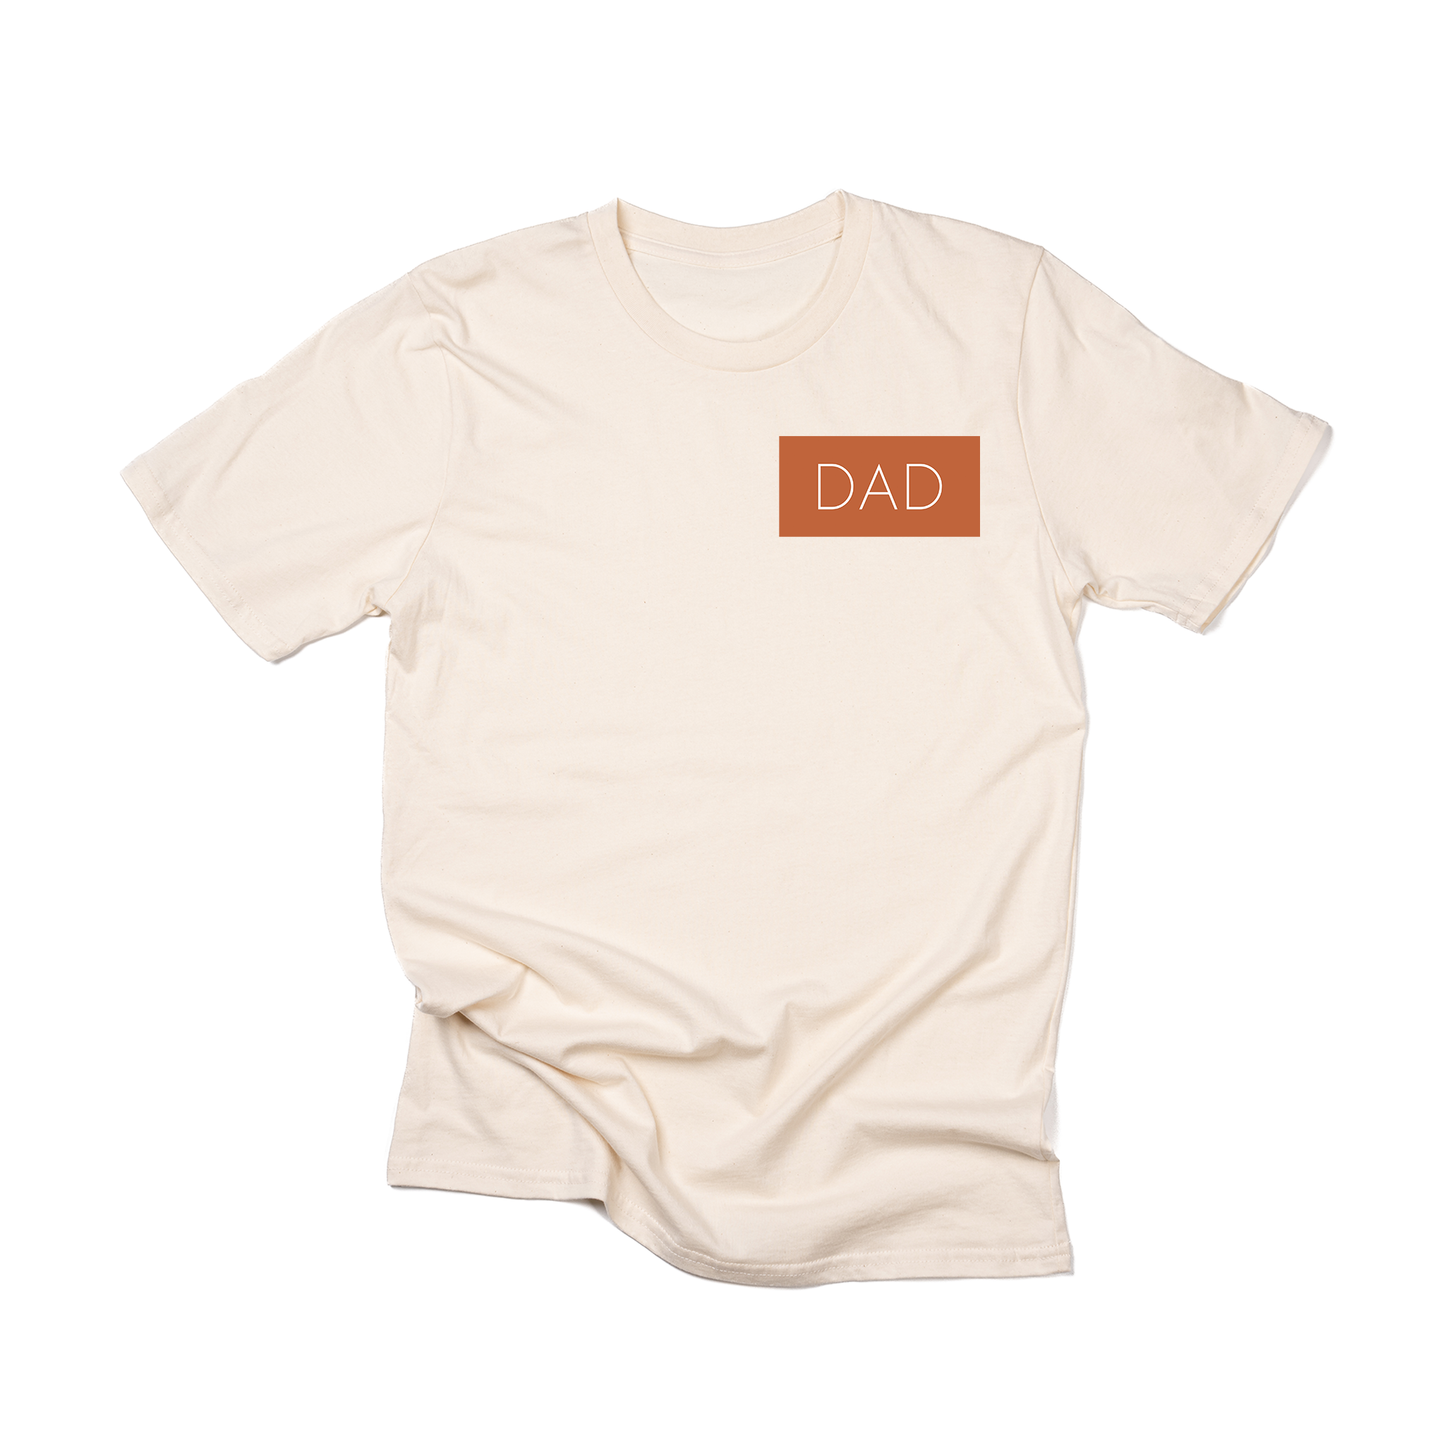 Dad (Boxed Collection, Pocket, Rust Box/White Text) - Tee (Natural)